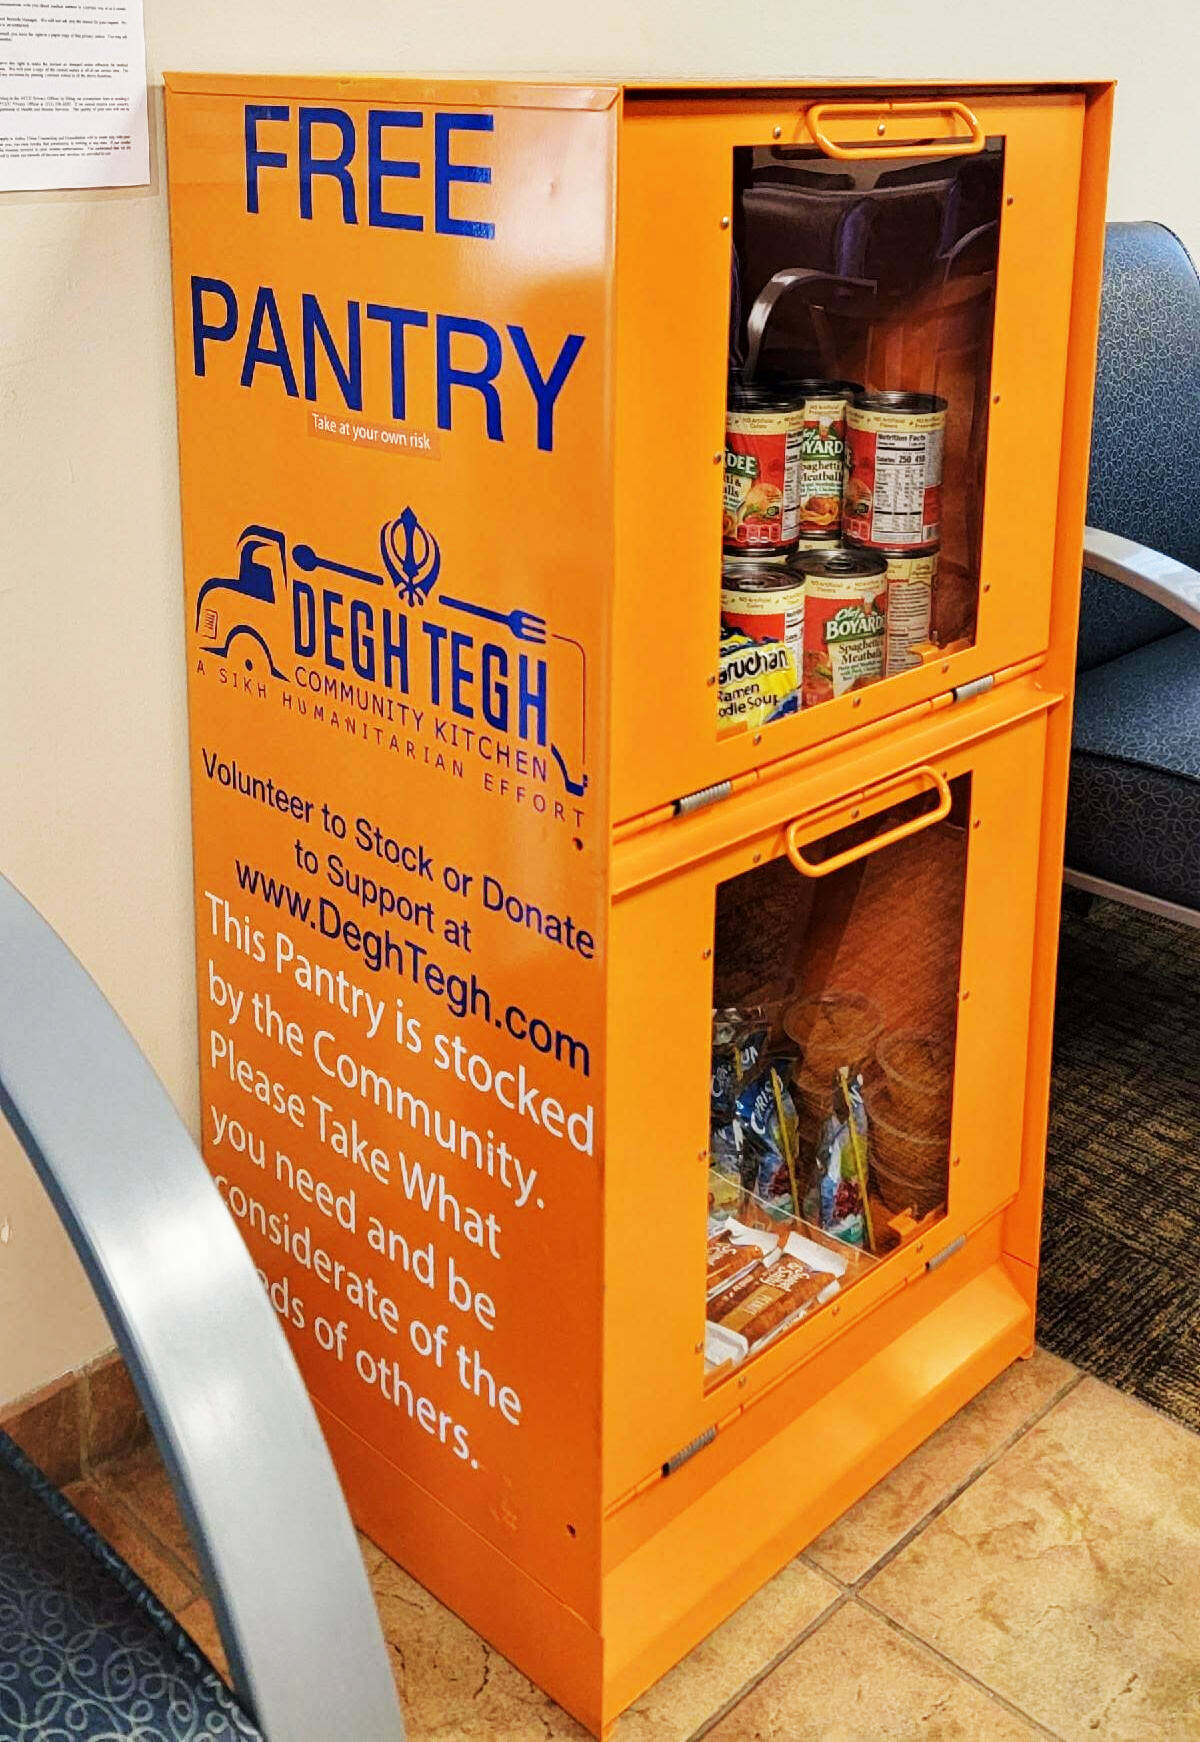 The Valley Cities Clinic in Kent, 325 W. Gowe St., will feature a free food pantry stocked by Degh Tegh Community Kitchen. COURTESY PHOTO, Valley Cities